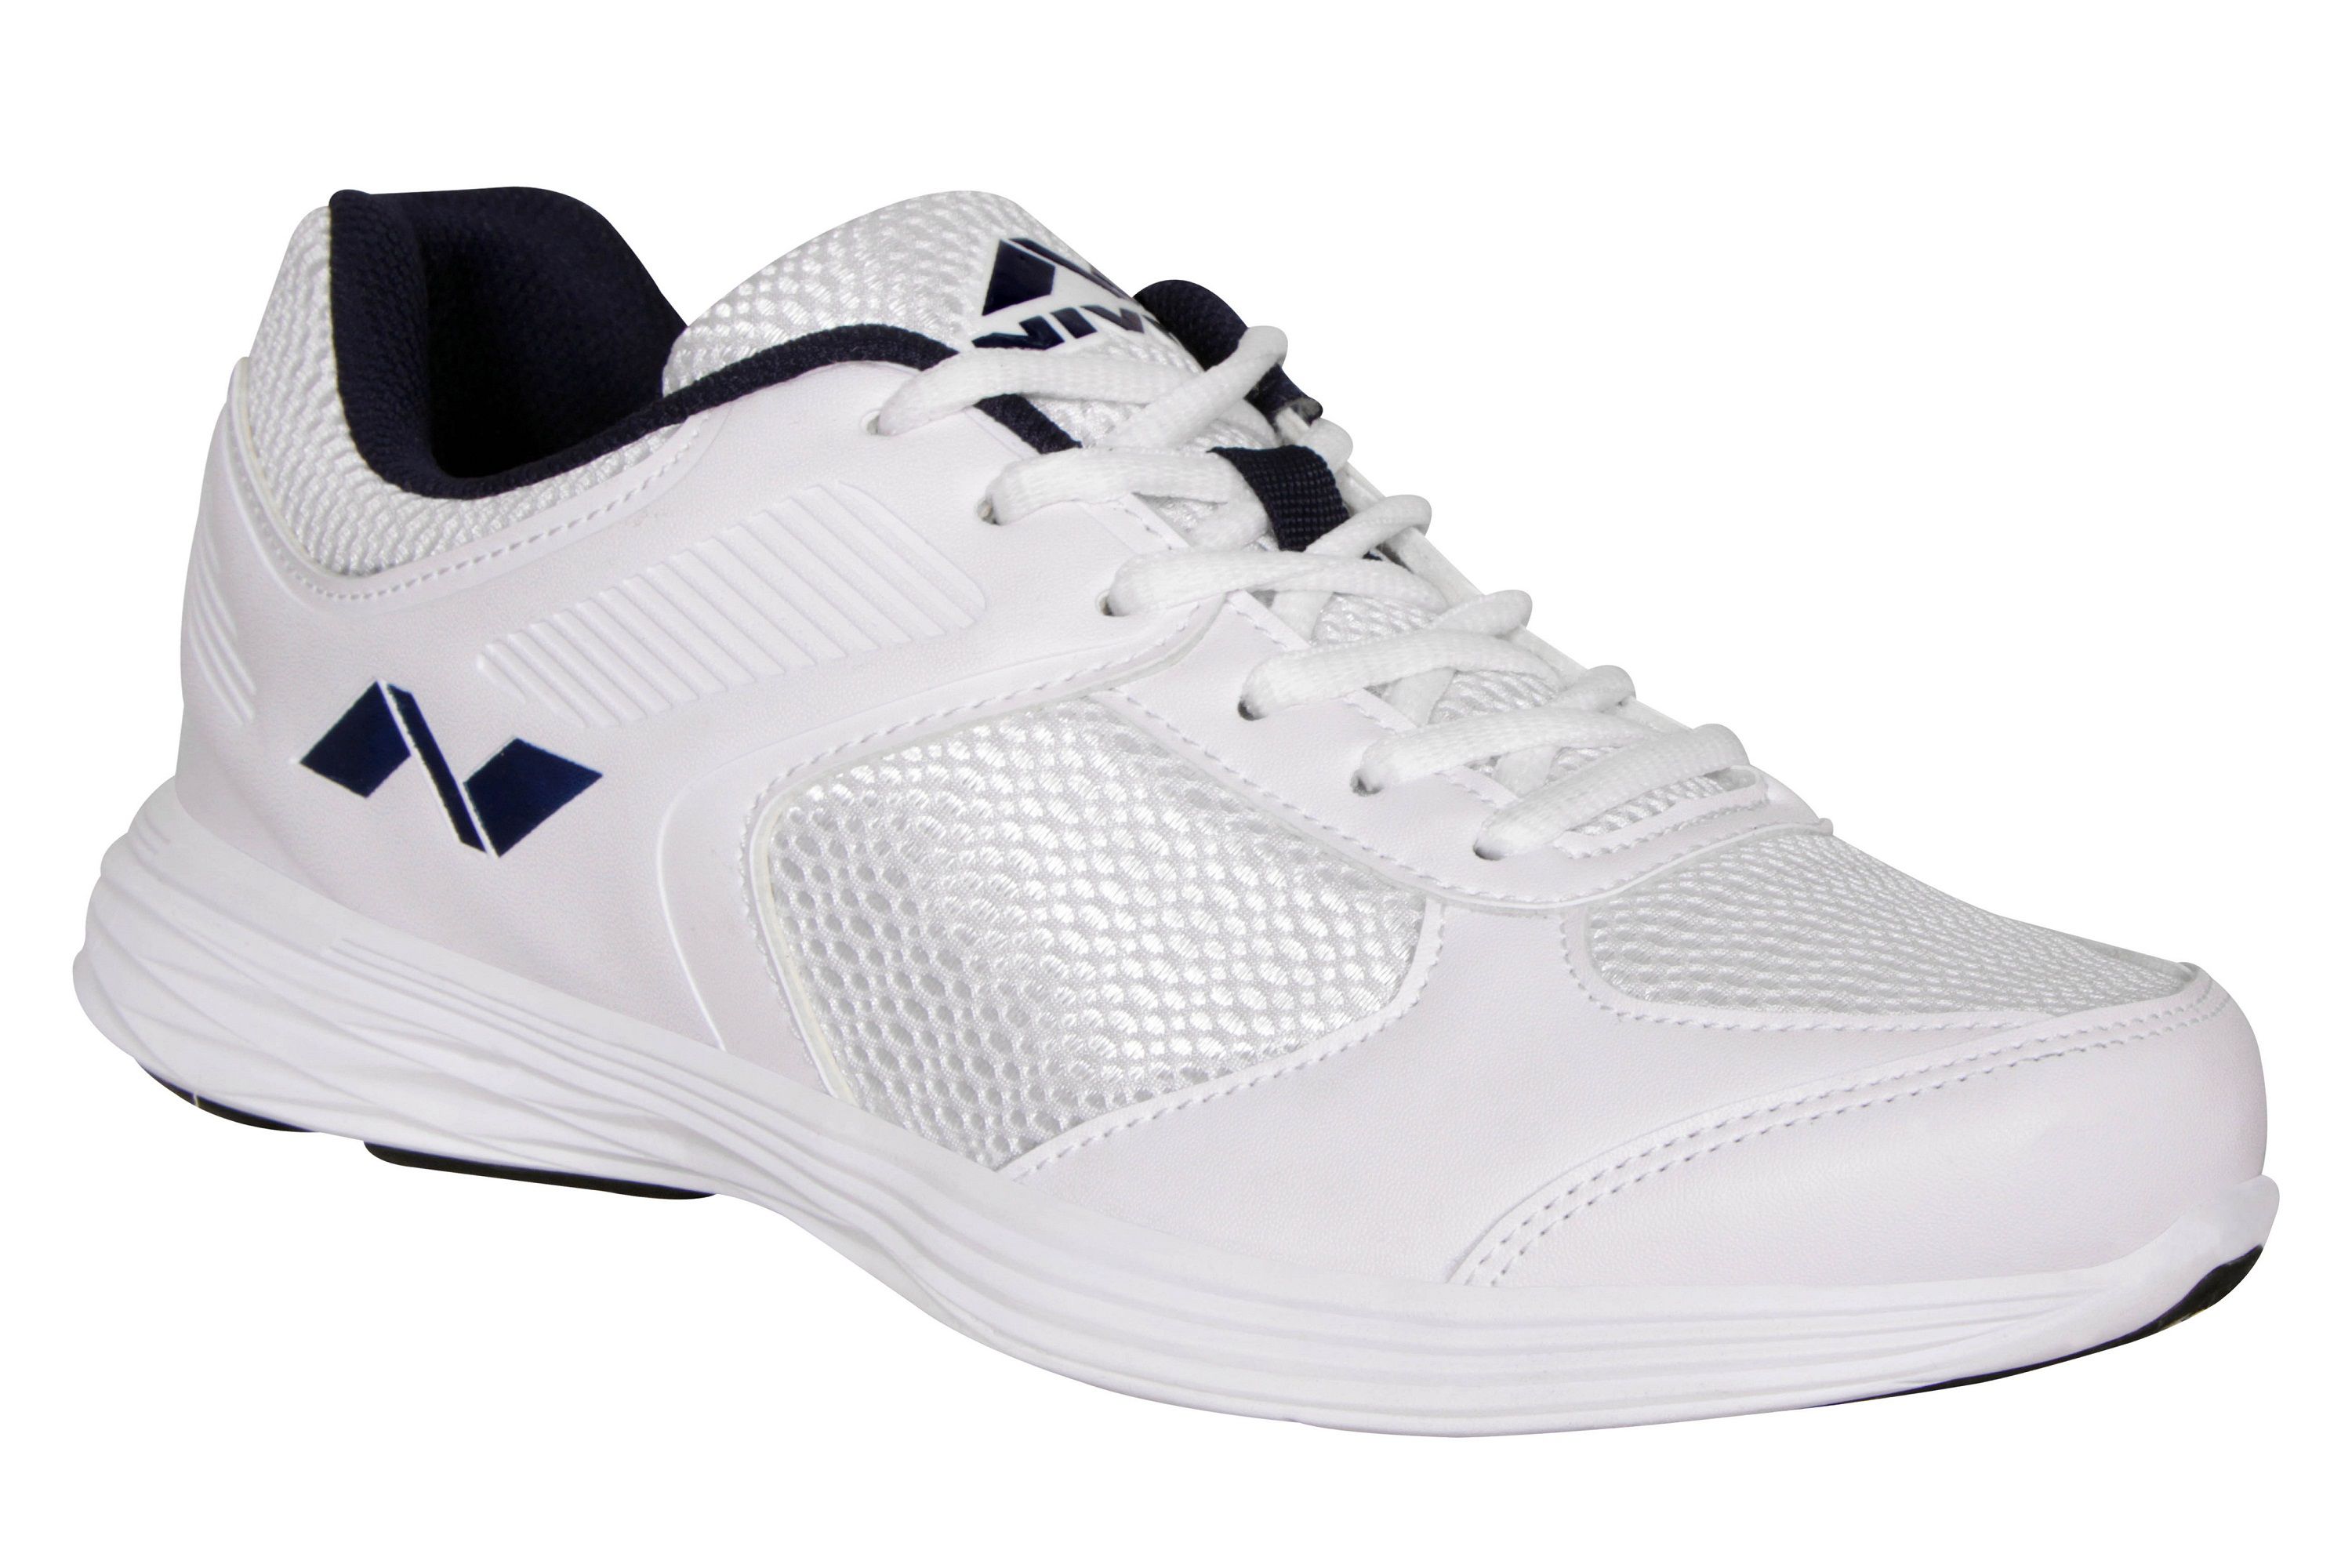 Nivia Hawks Running Shoes White For Gym Wear: Buy Online at Best Price ...